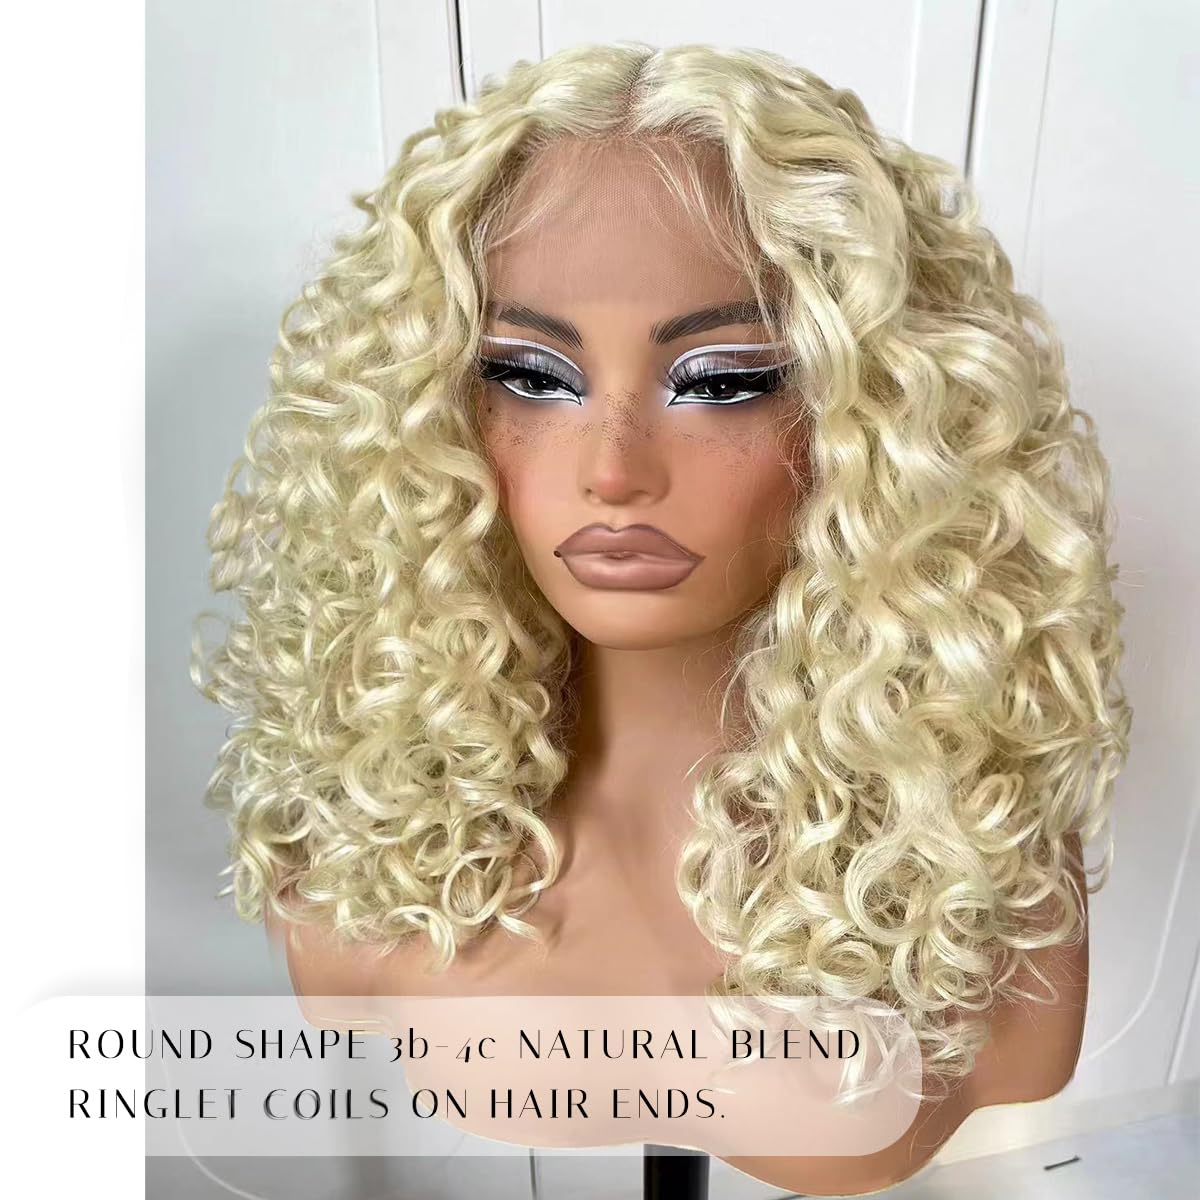 16inch Blonde Skunk Stripe Curly Lace Front Wig Synthetic Human Hair Blend Glueless Pre Plucked HD Lace Short Curly Lace Front Wigs for Black Women